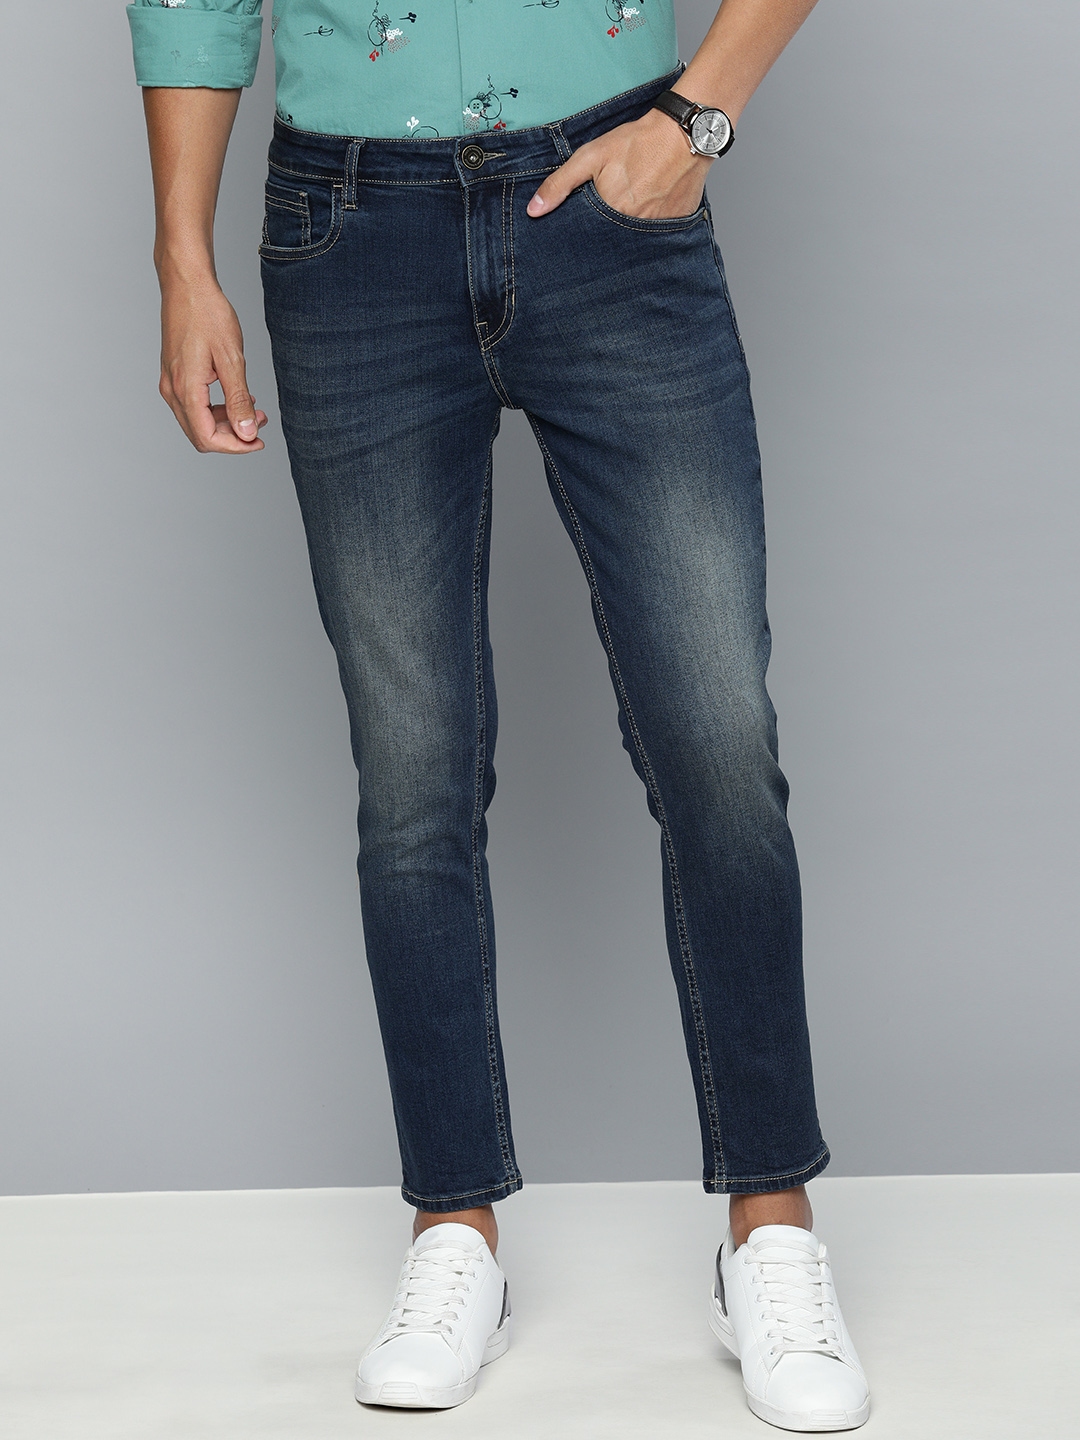 DTT straight fit jeans in mid stone wash blue, ASOS